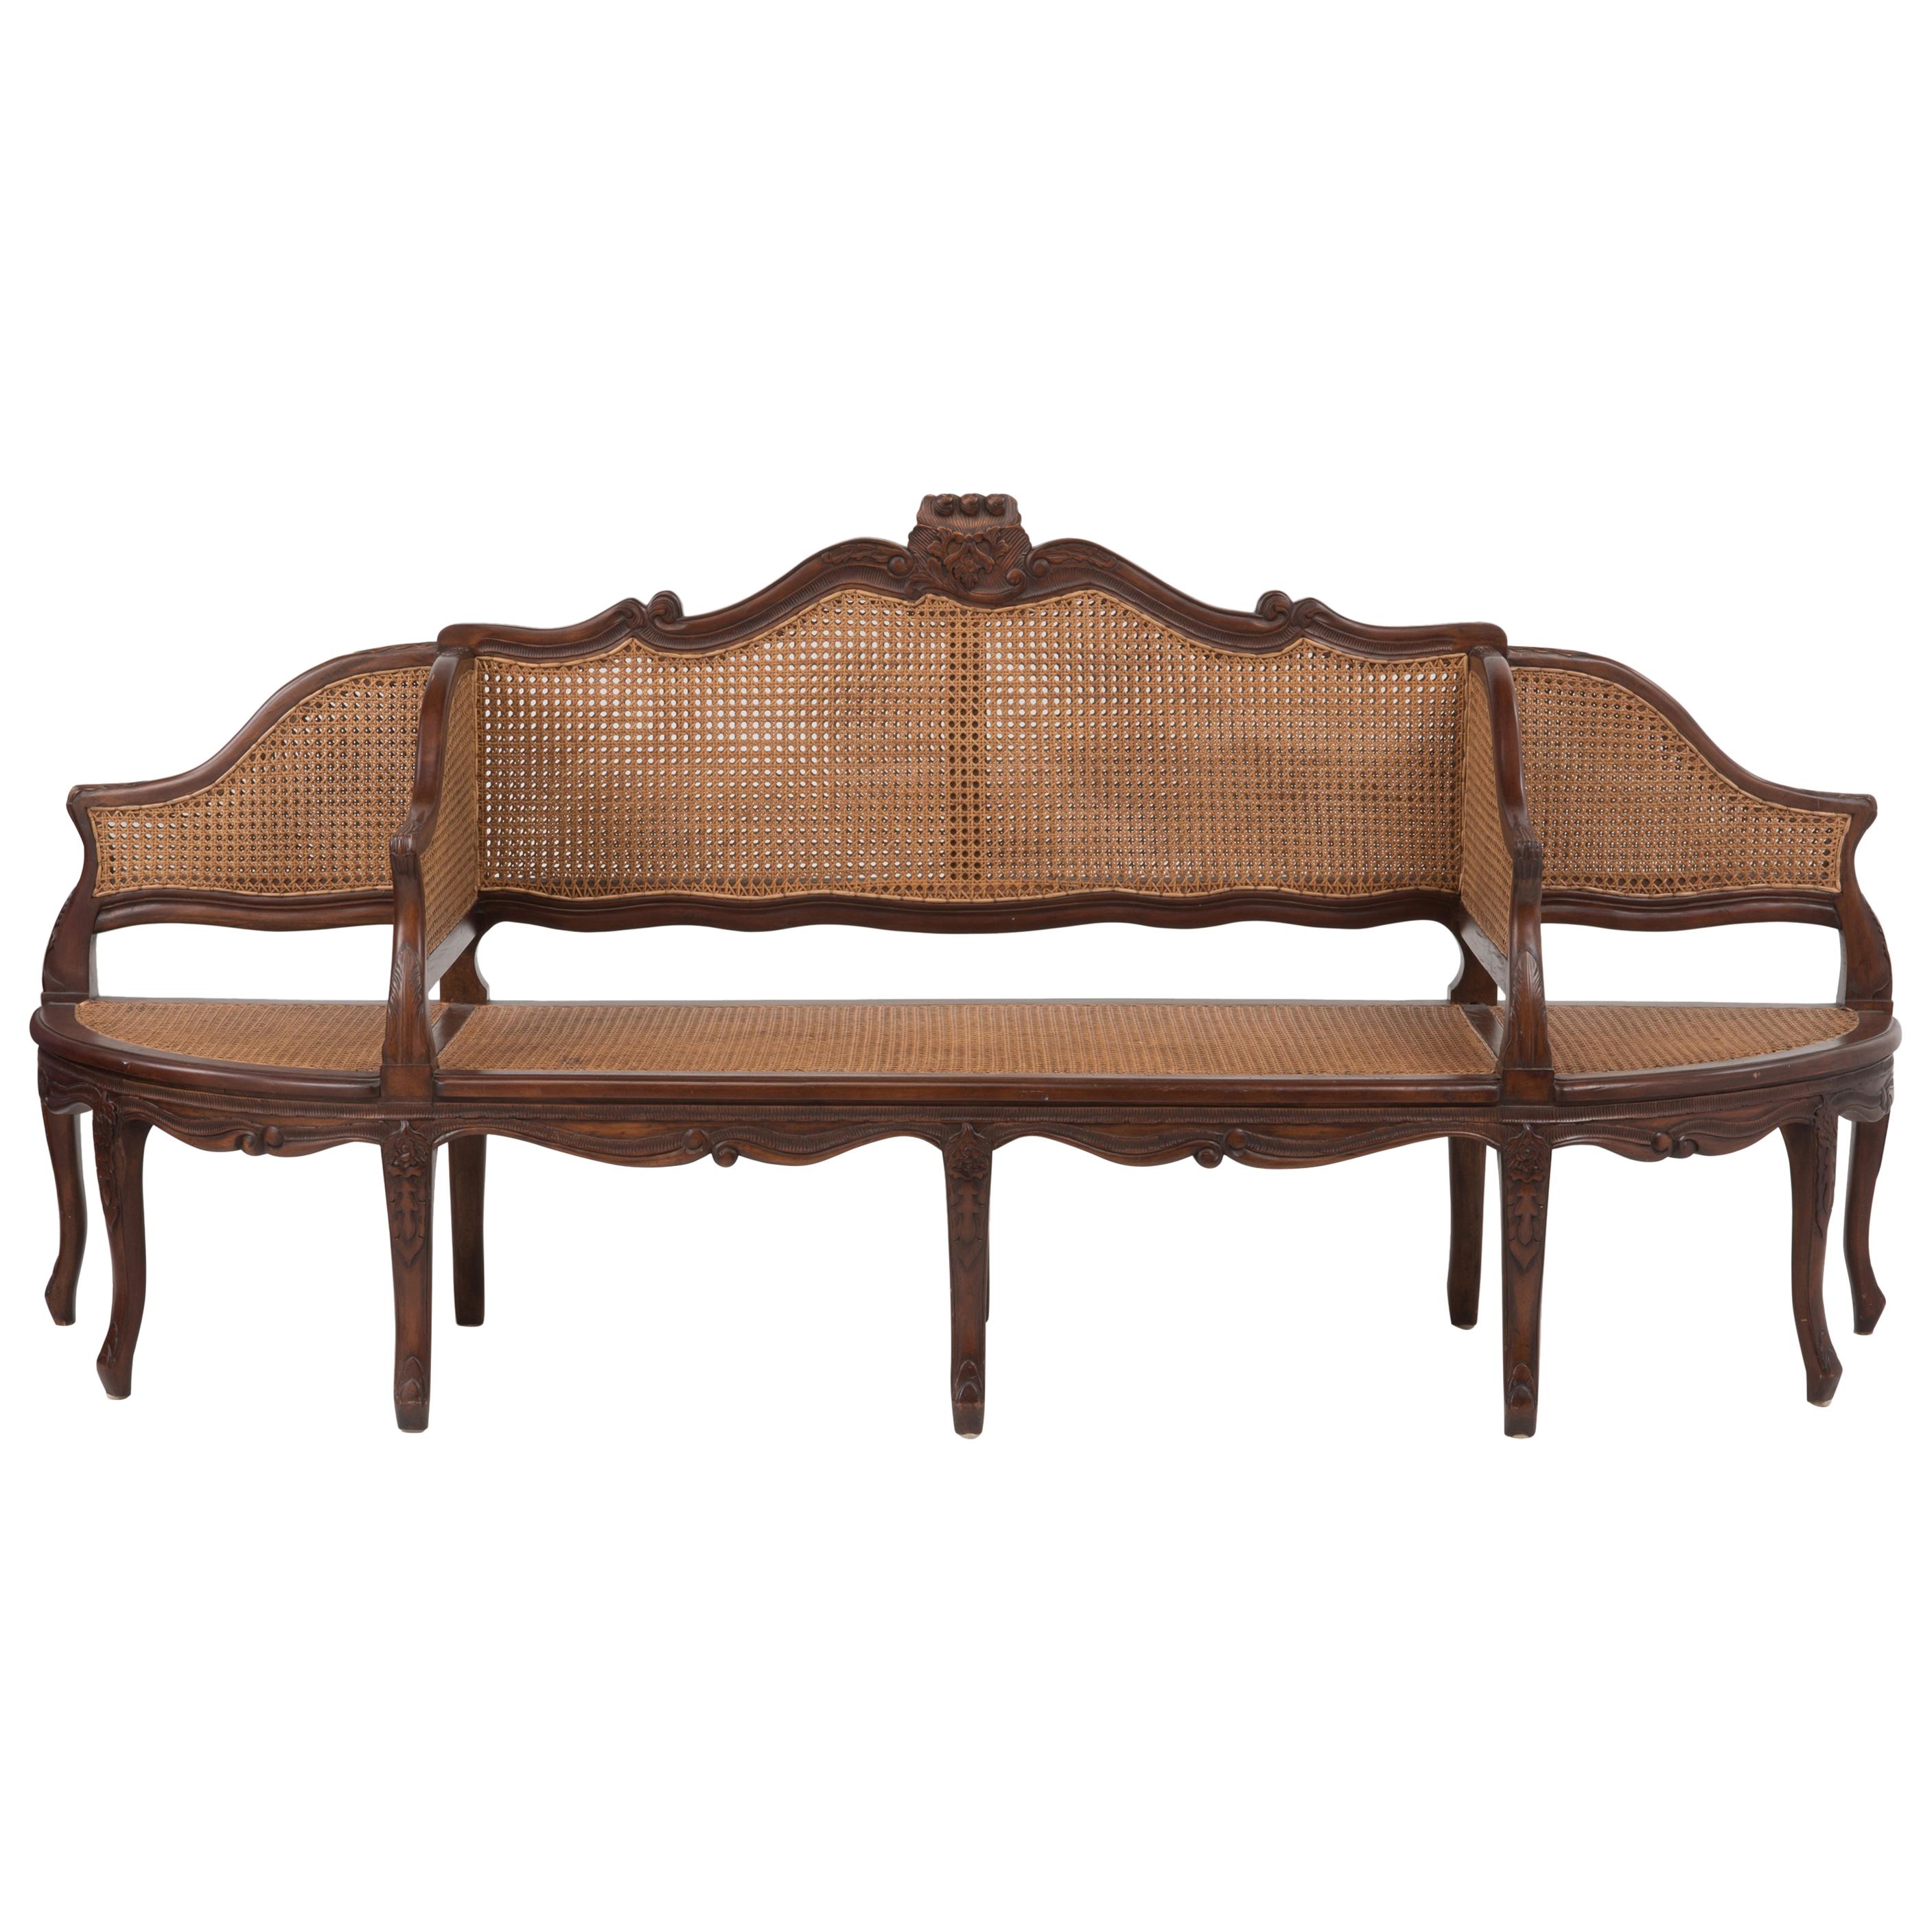 Spectacular Ornately Carved and Caned 3 Section Bench Settee Loveseat